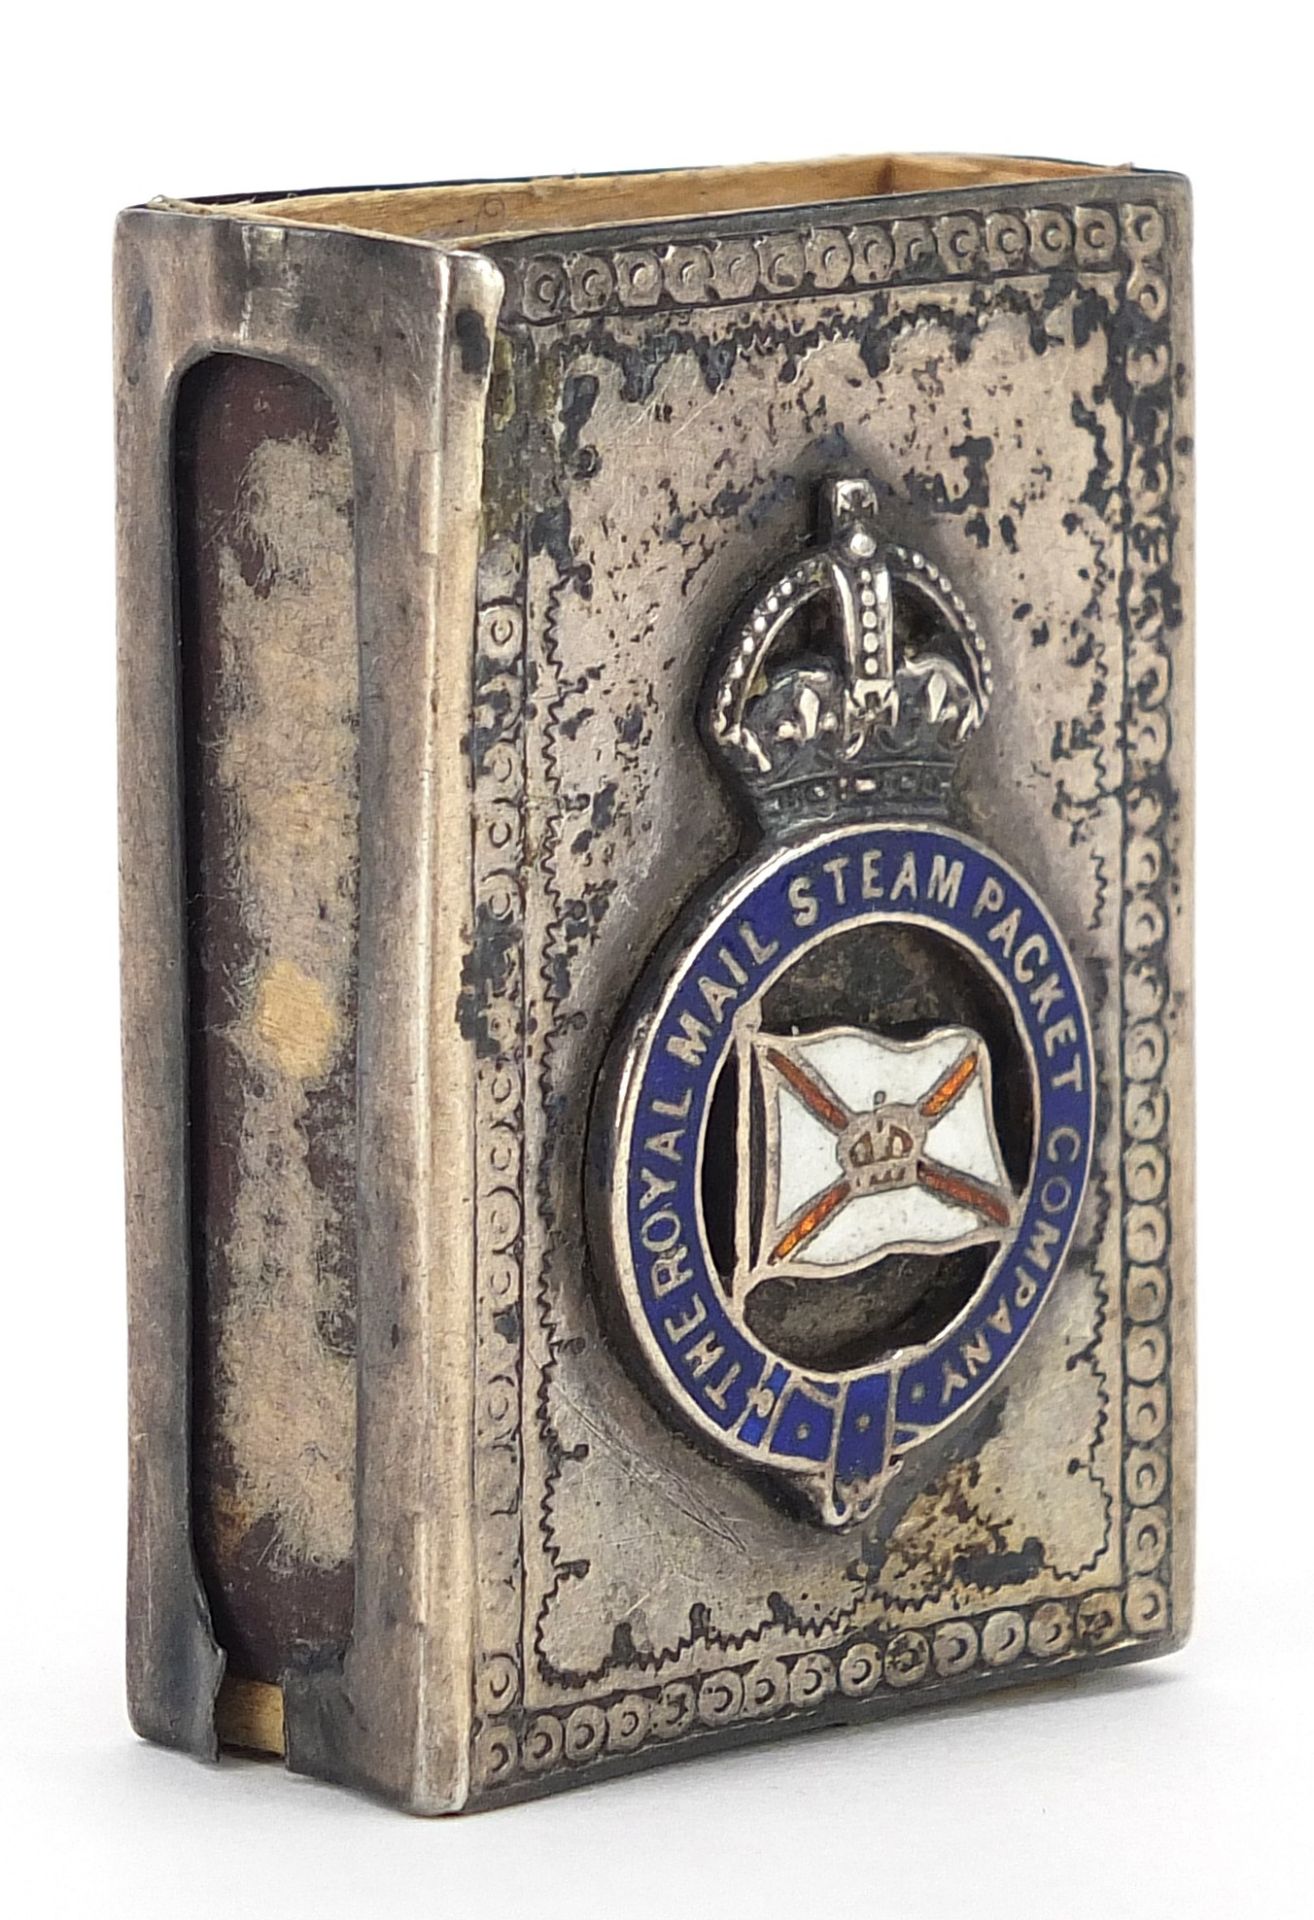 Royal Mail Steam Packet Company silver and enamel matchbox case, indistinct maker's mark, Birmingham